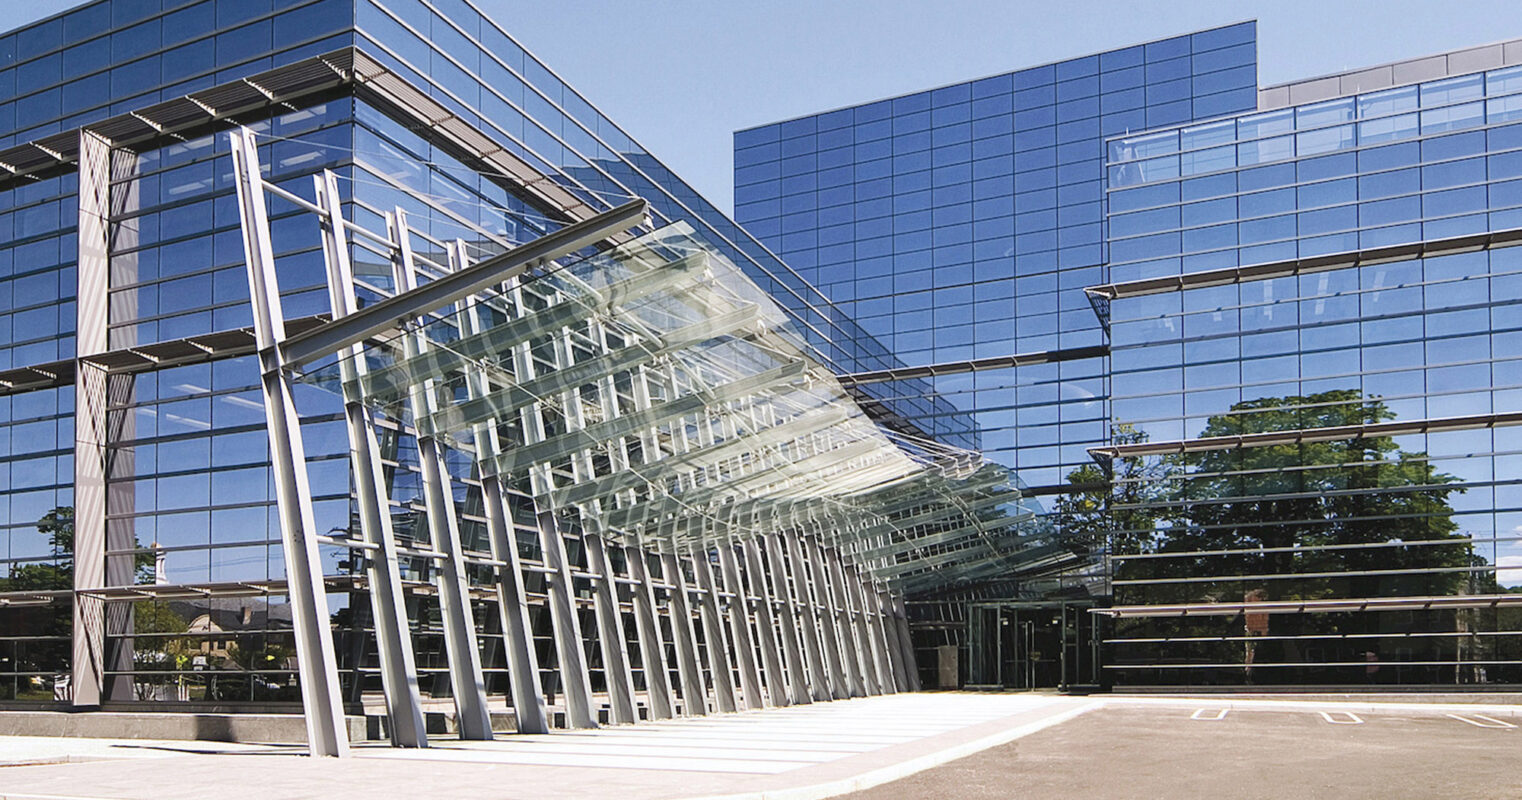 Modern corporate building entrance featuring a prominent glass structure, reflective façade, and strong geometric lines that create a striking visual symmetry against the blue sky.